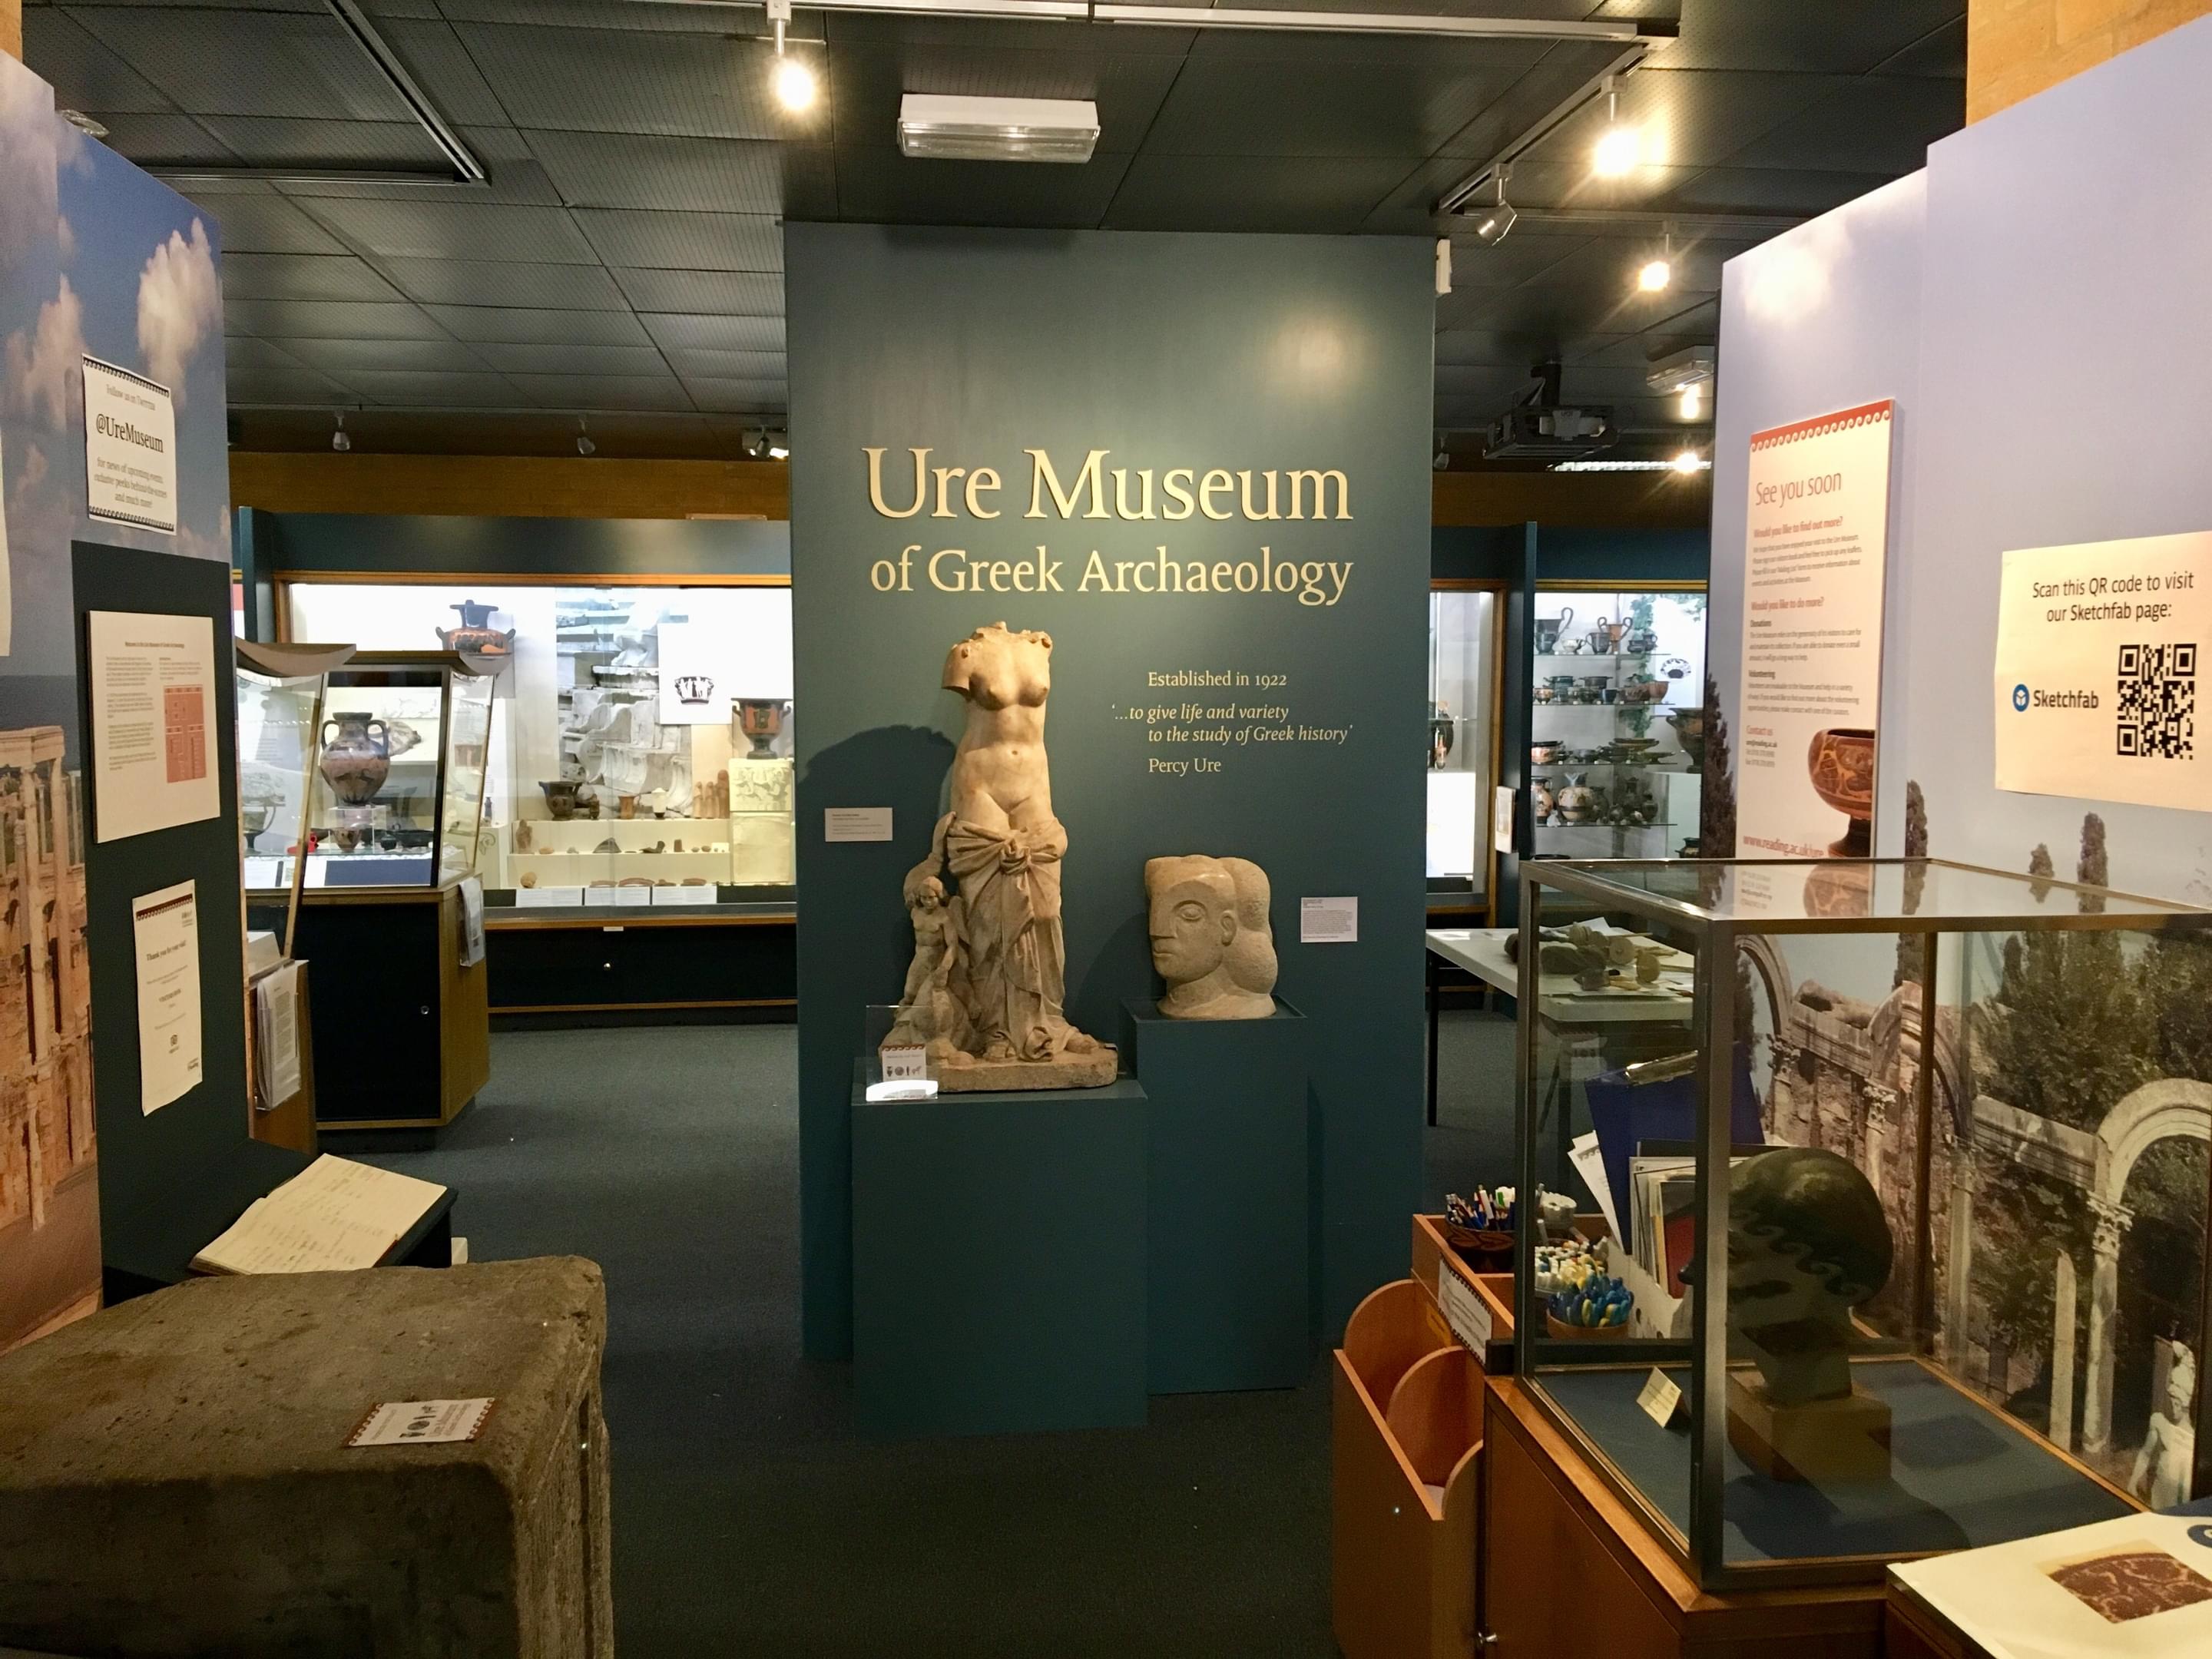 Ure Museum Of Greek Archaeology Overview